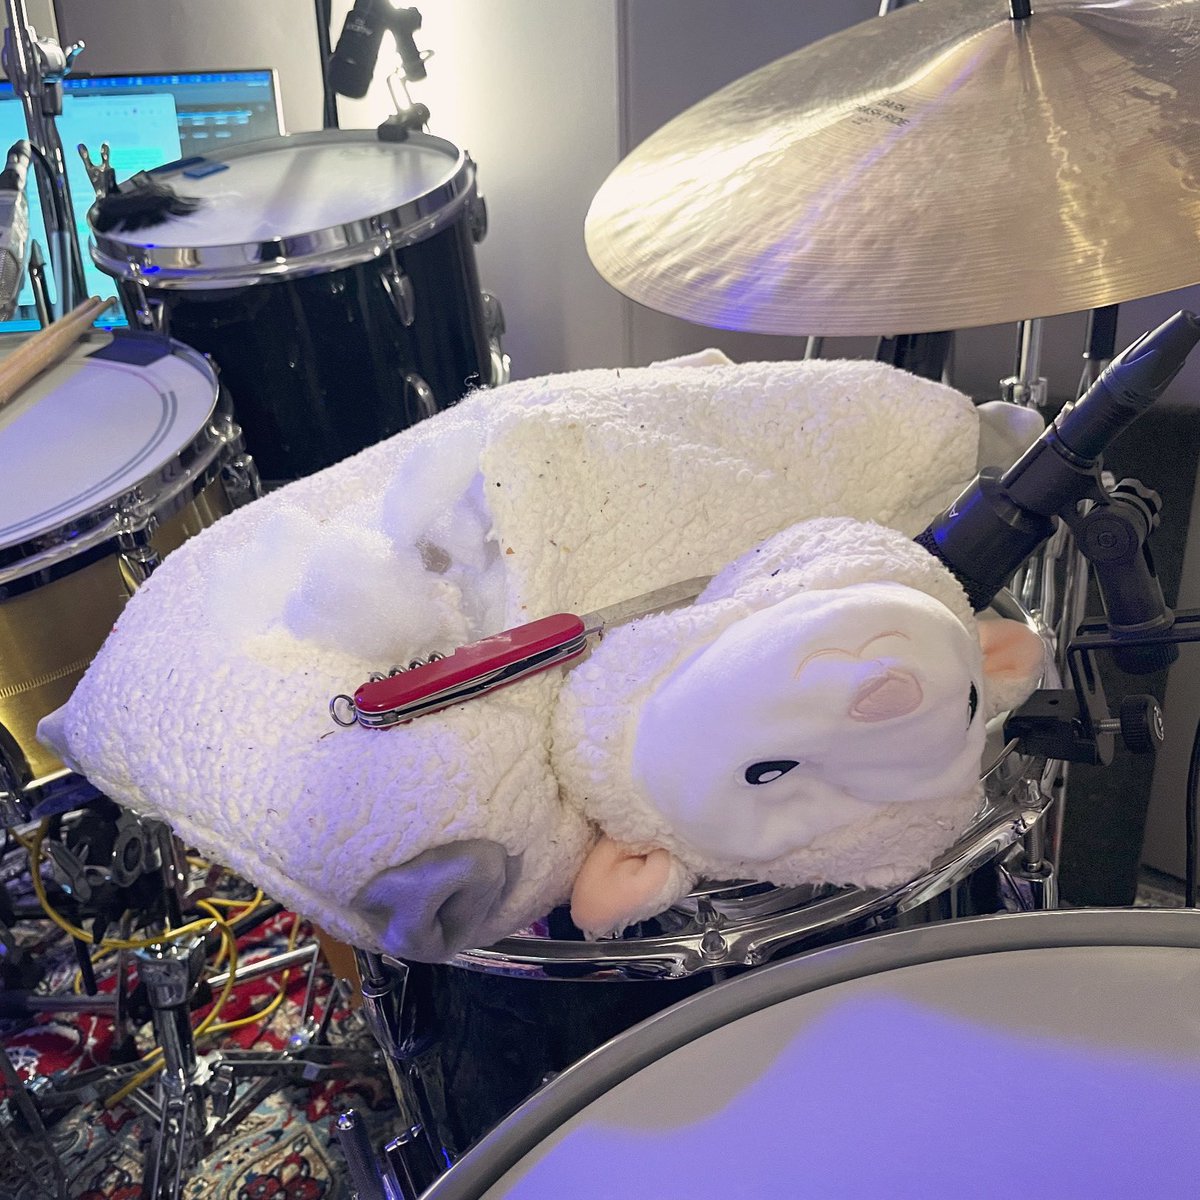 Please say goodbye to Fred the sheep. He died, so I can get his stuffings to muffle my toms properly! Thanks Fred ❤️🪦
.
#drummer #studiodrummer #studiolife